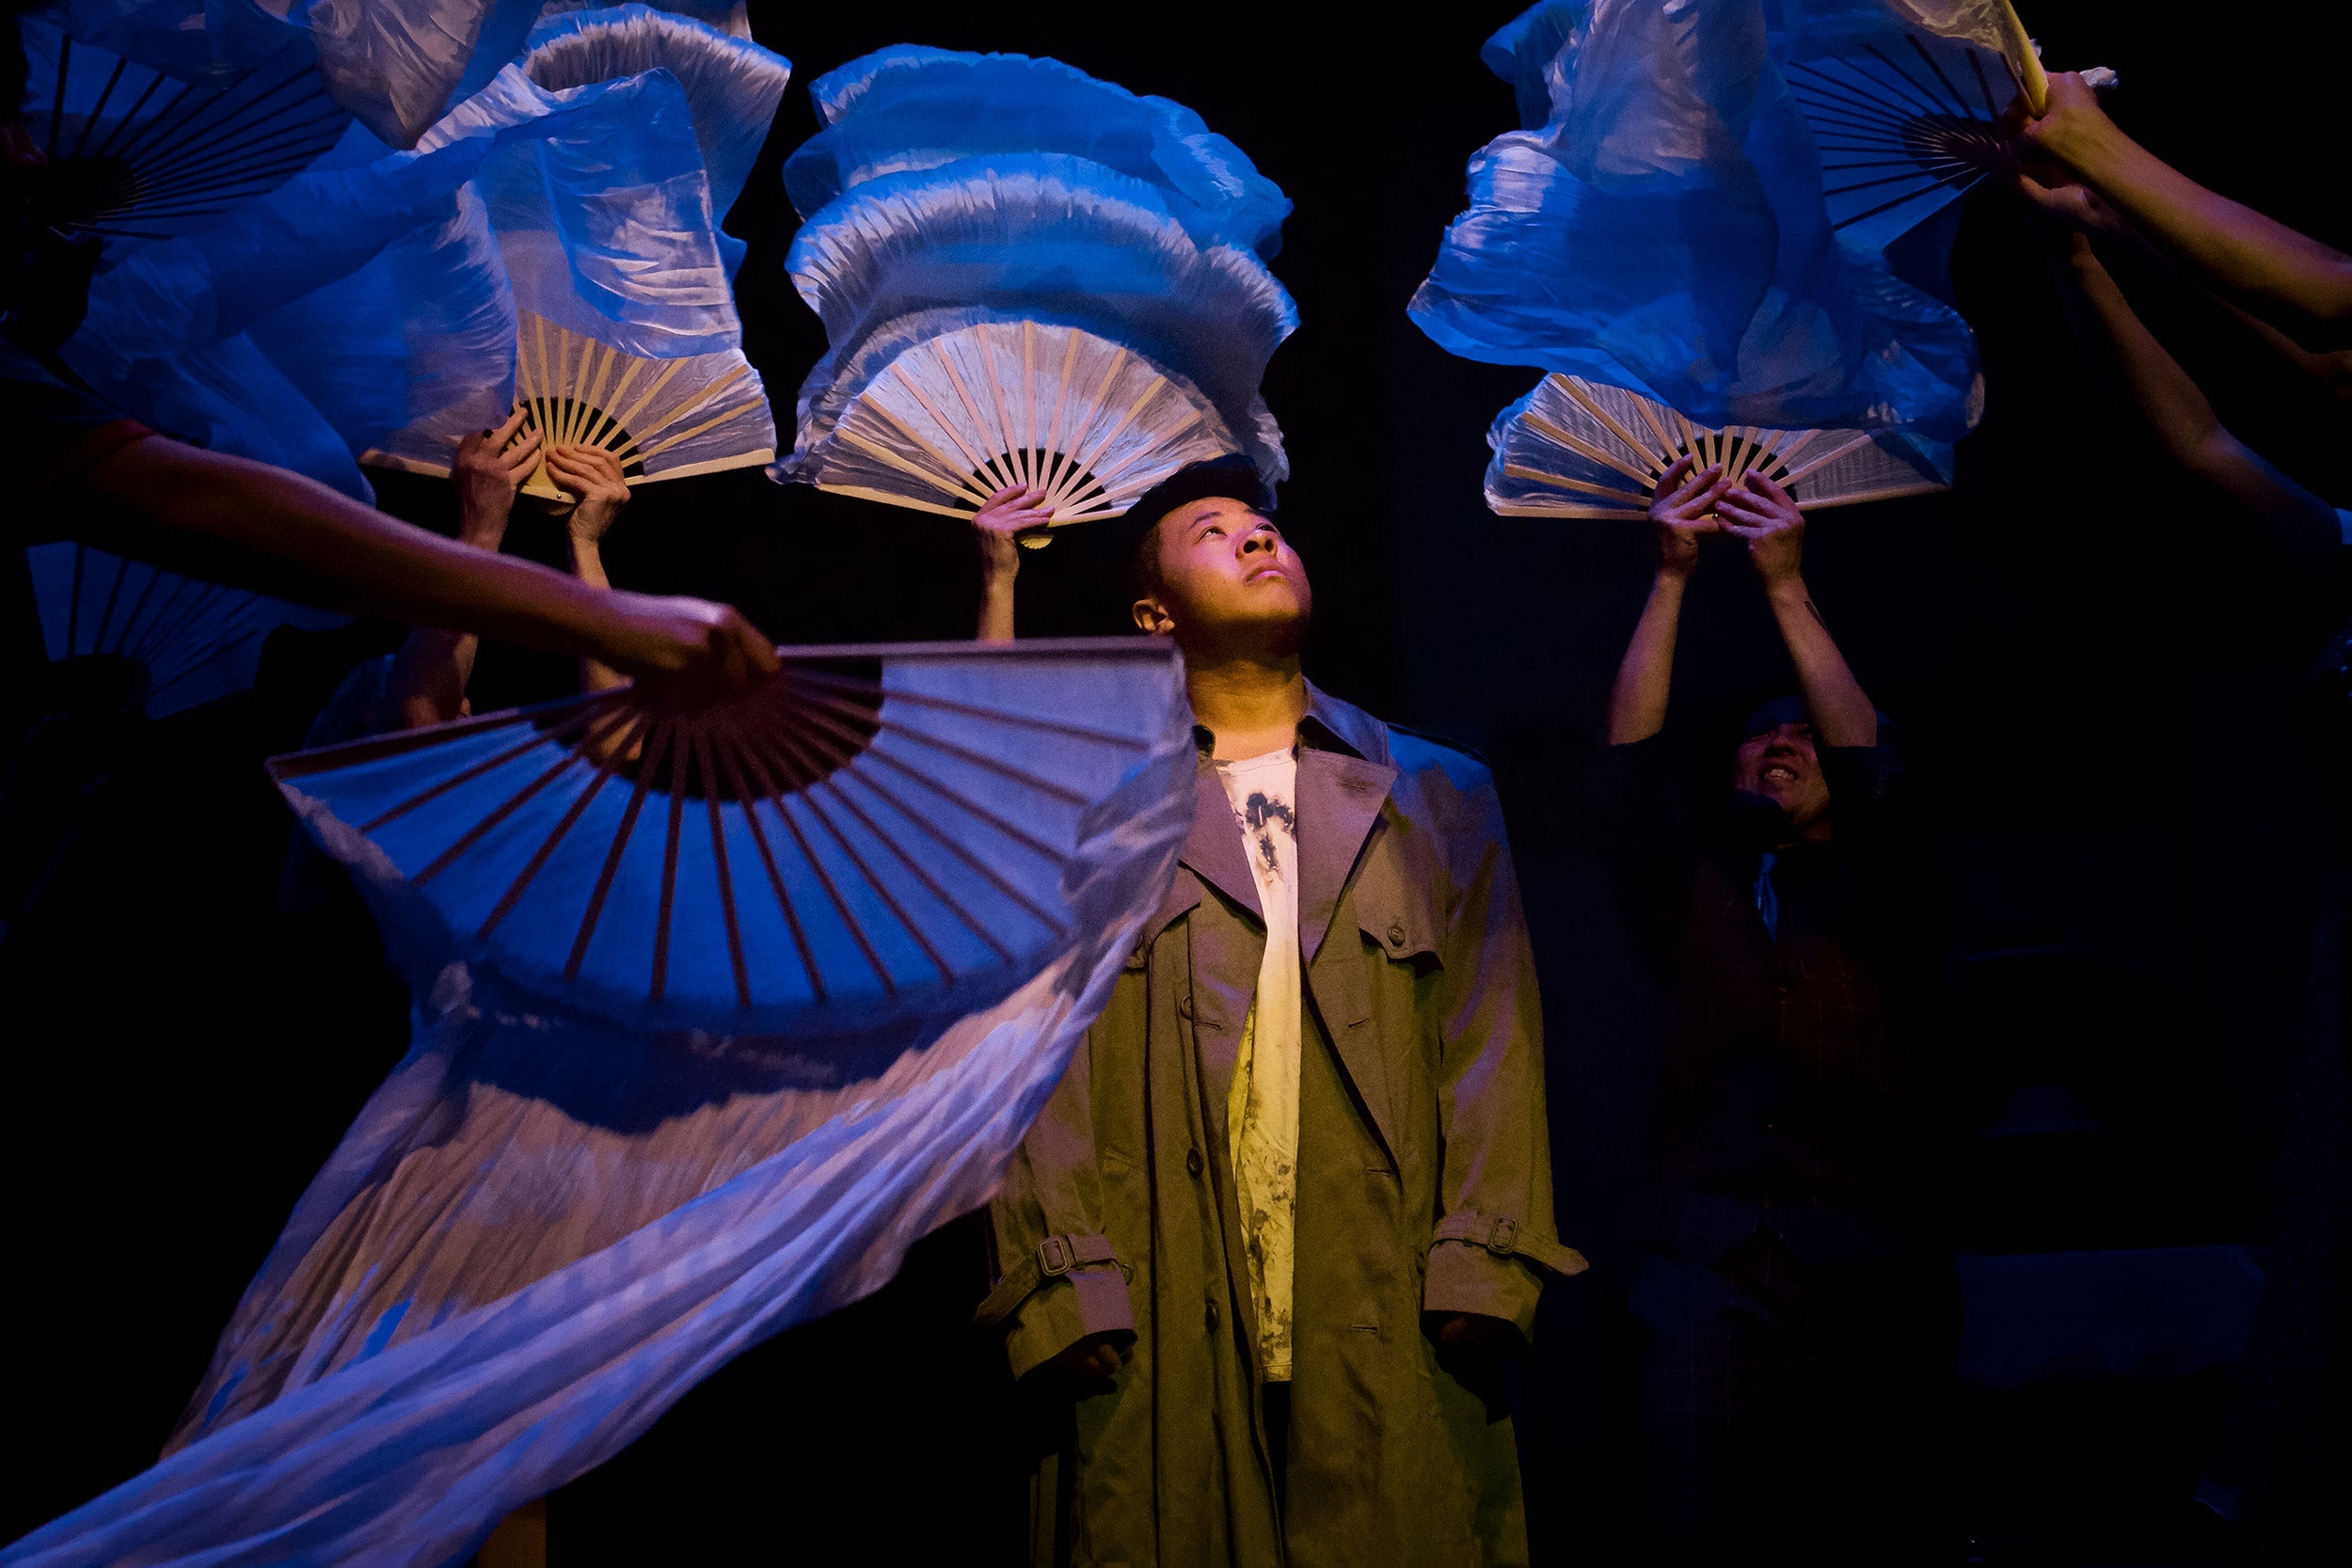 Richard (Jupiter Lê) in surrounded by fluttering fans in a scene from the play "SWAN."